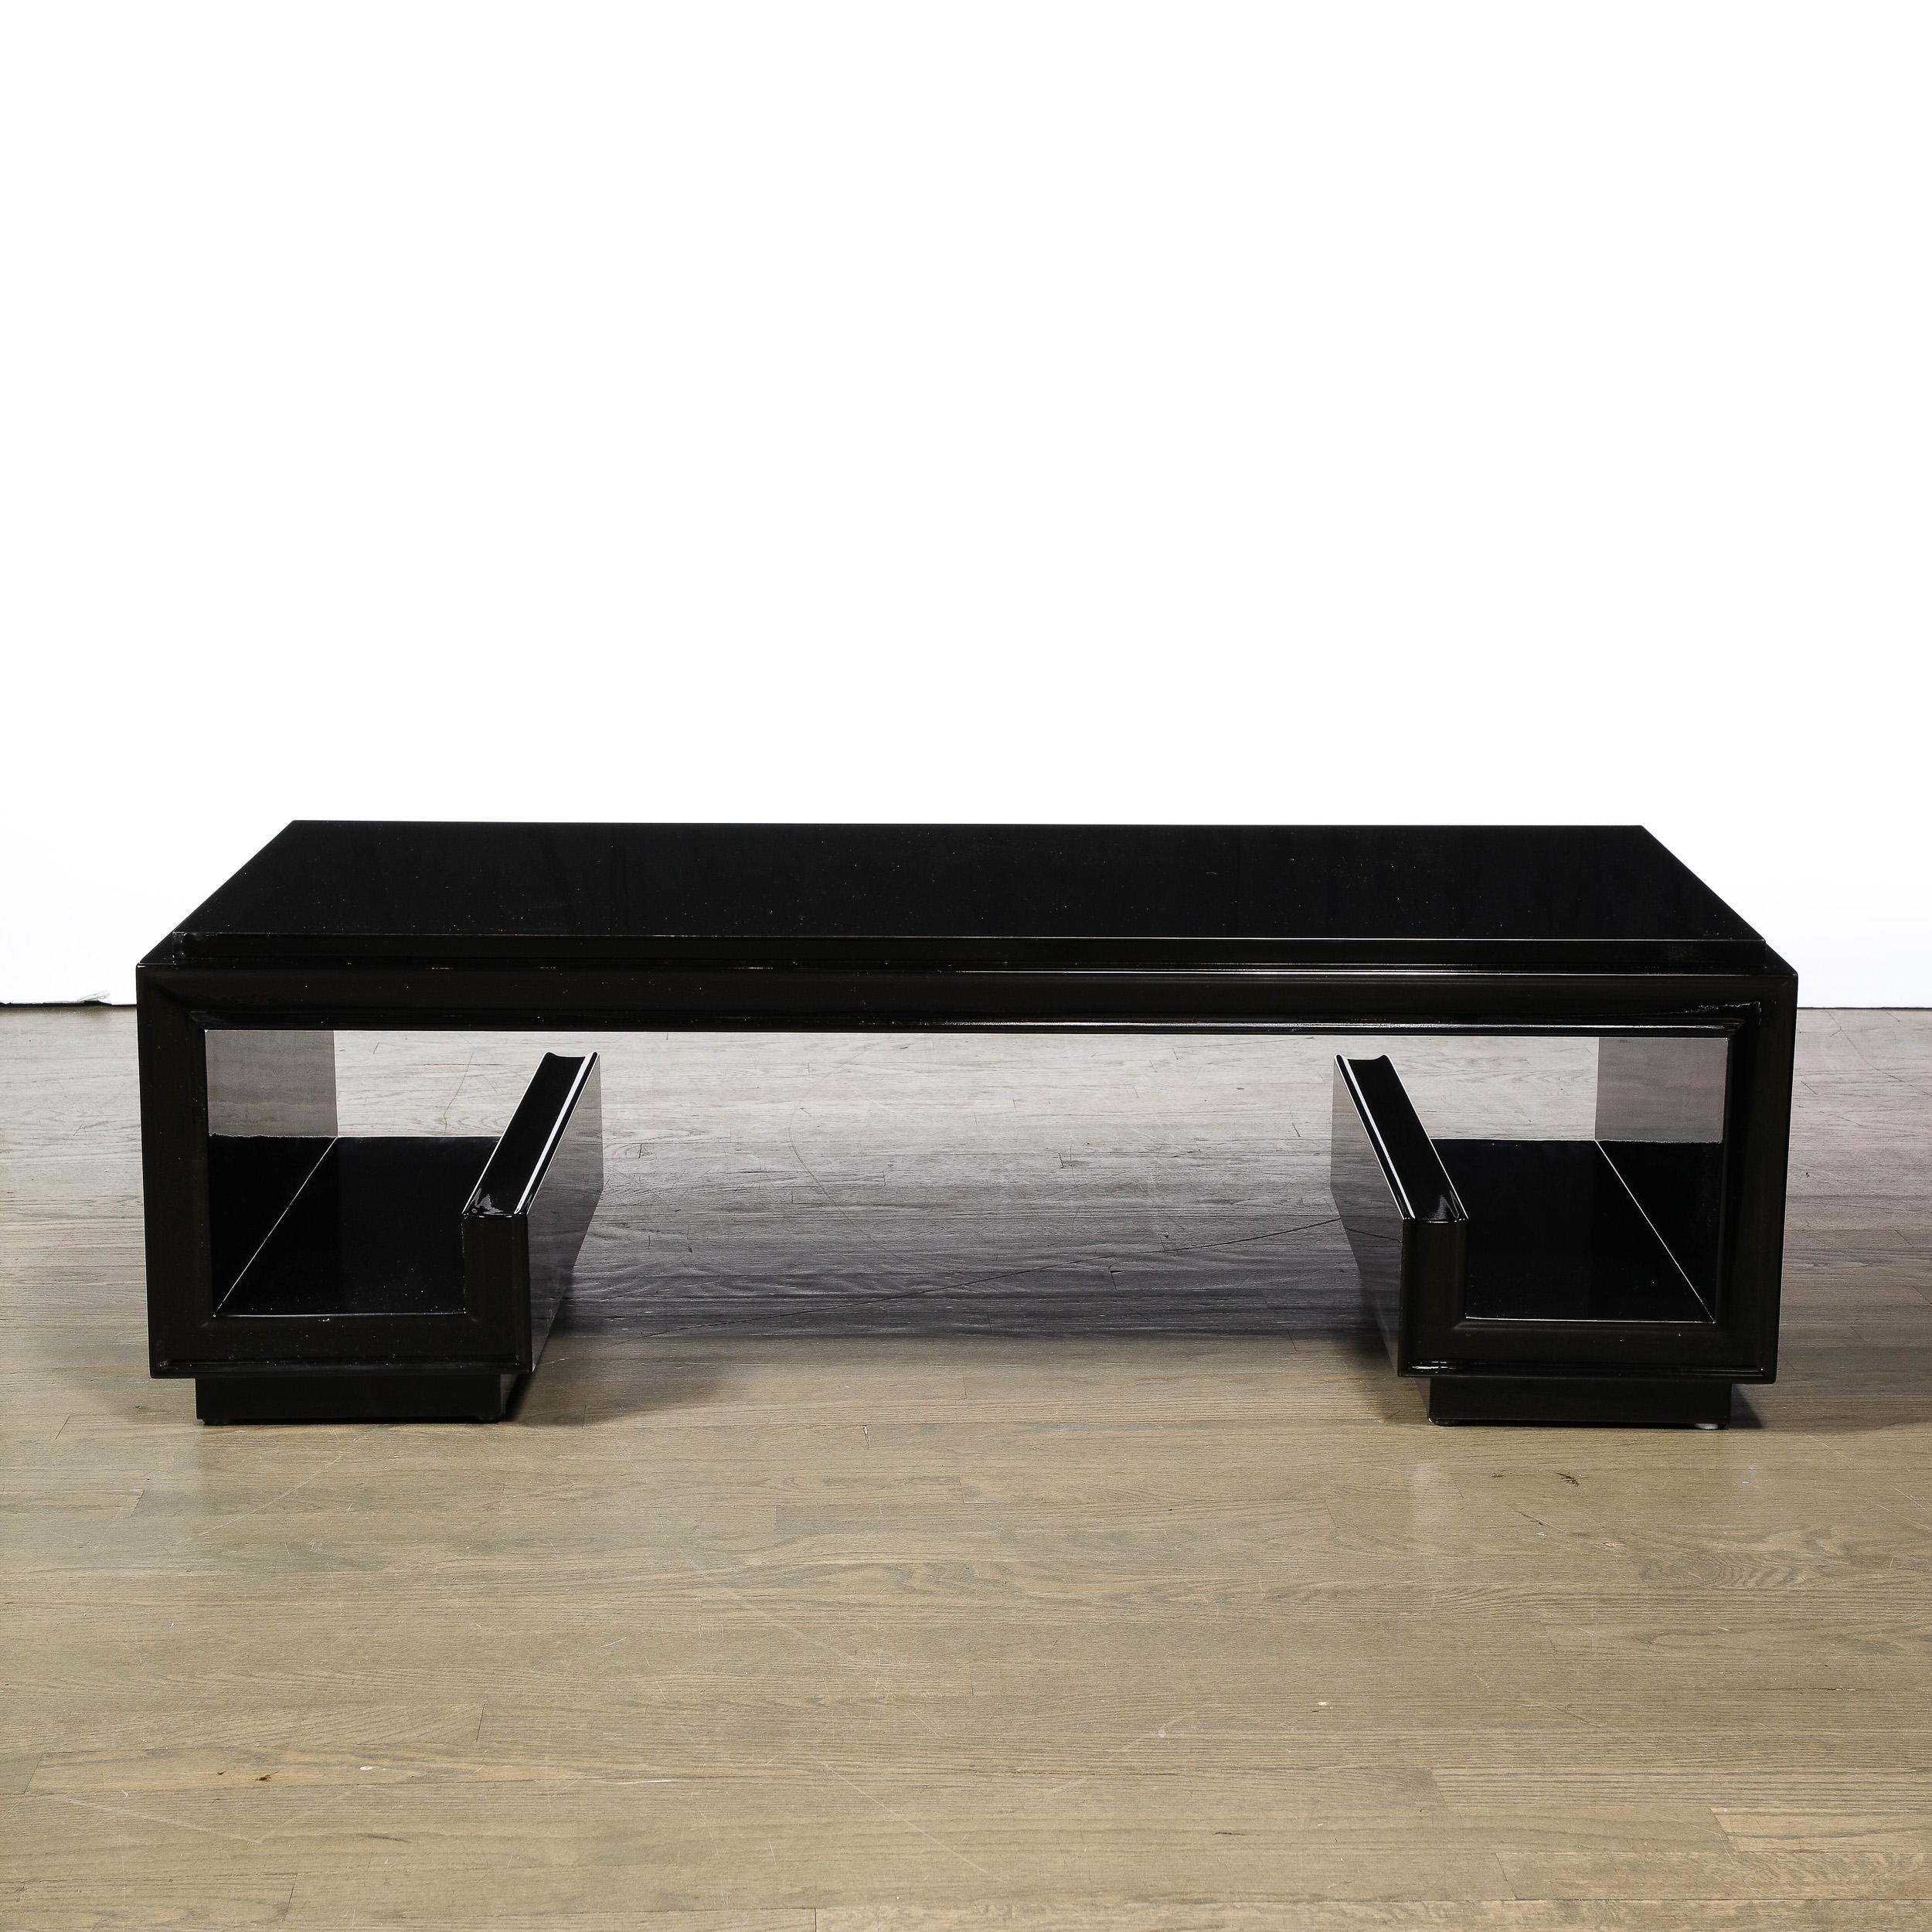 This refined and graphic cocktail table was realized by the great Paul Frankl in the United States circa 1947. It features a stylized and abstracted Greek Key motif in black lacquer. The table suggests a three sided rectangle with an open bottom,